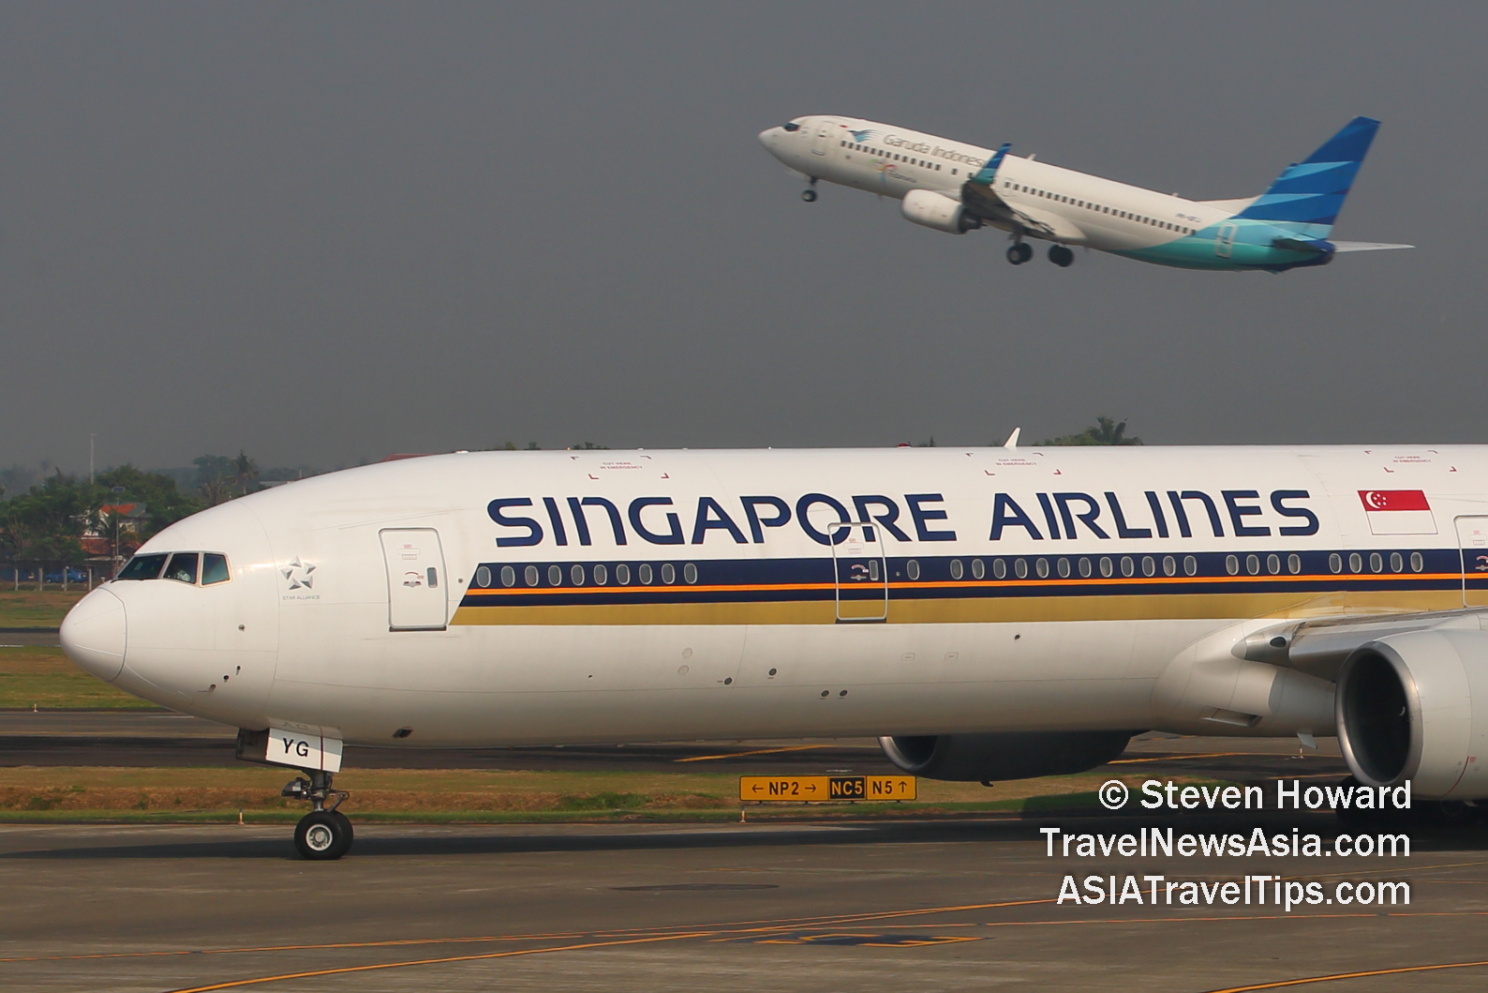 Singapore Airlines Boeing 777 reg: 9V-SYG in the foreground, with a Garuda aircraft taking off in the background. Picture by Steven Howard of TravelNewsAsia.com Click to enlarge.